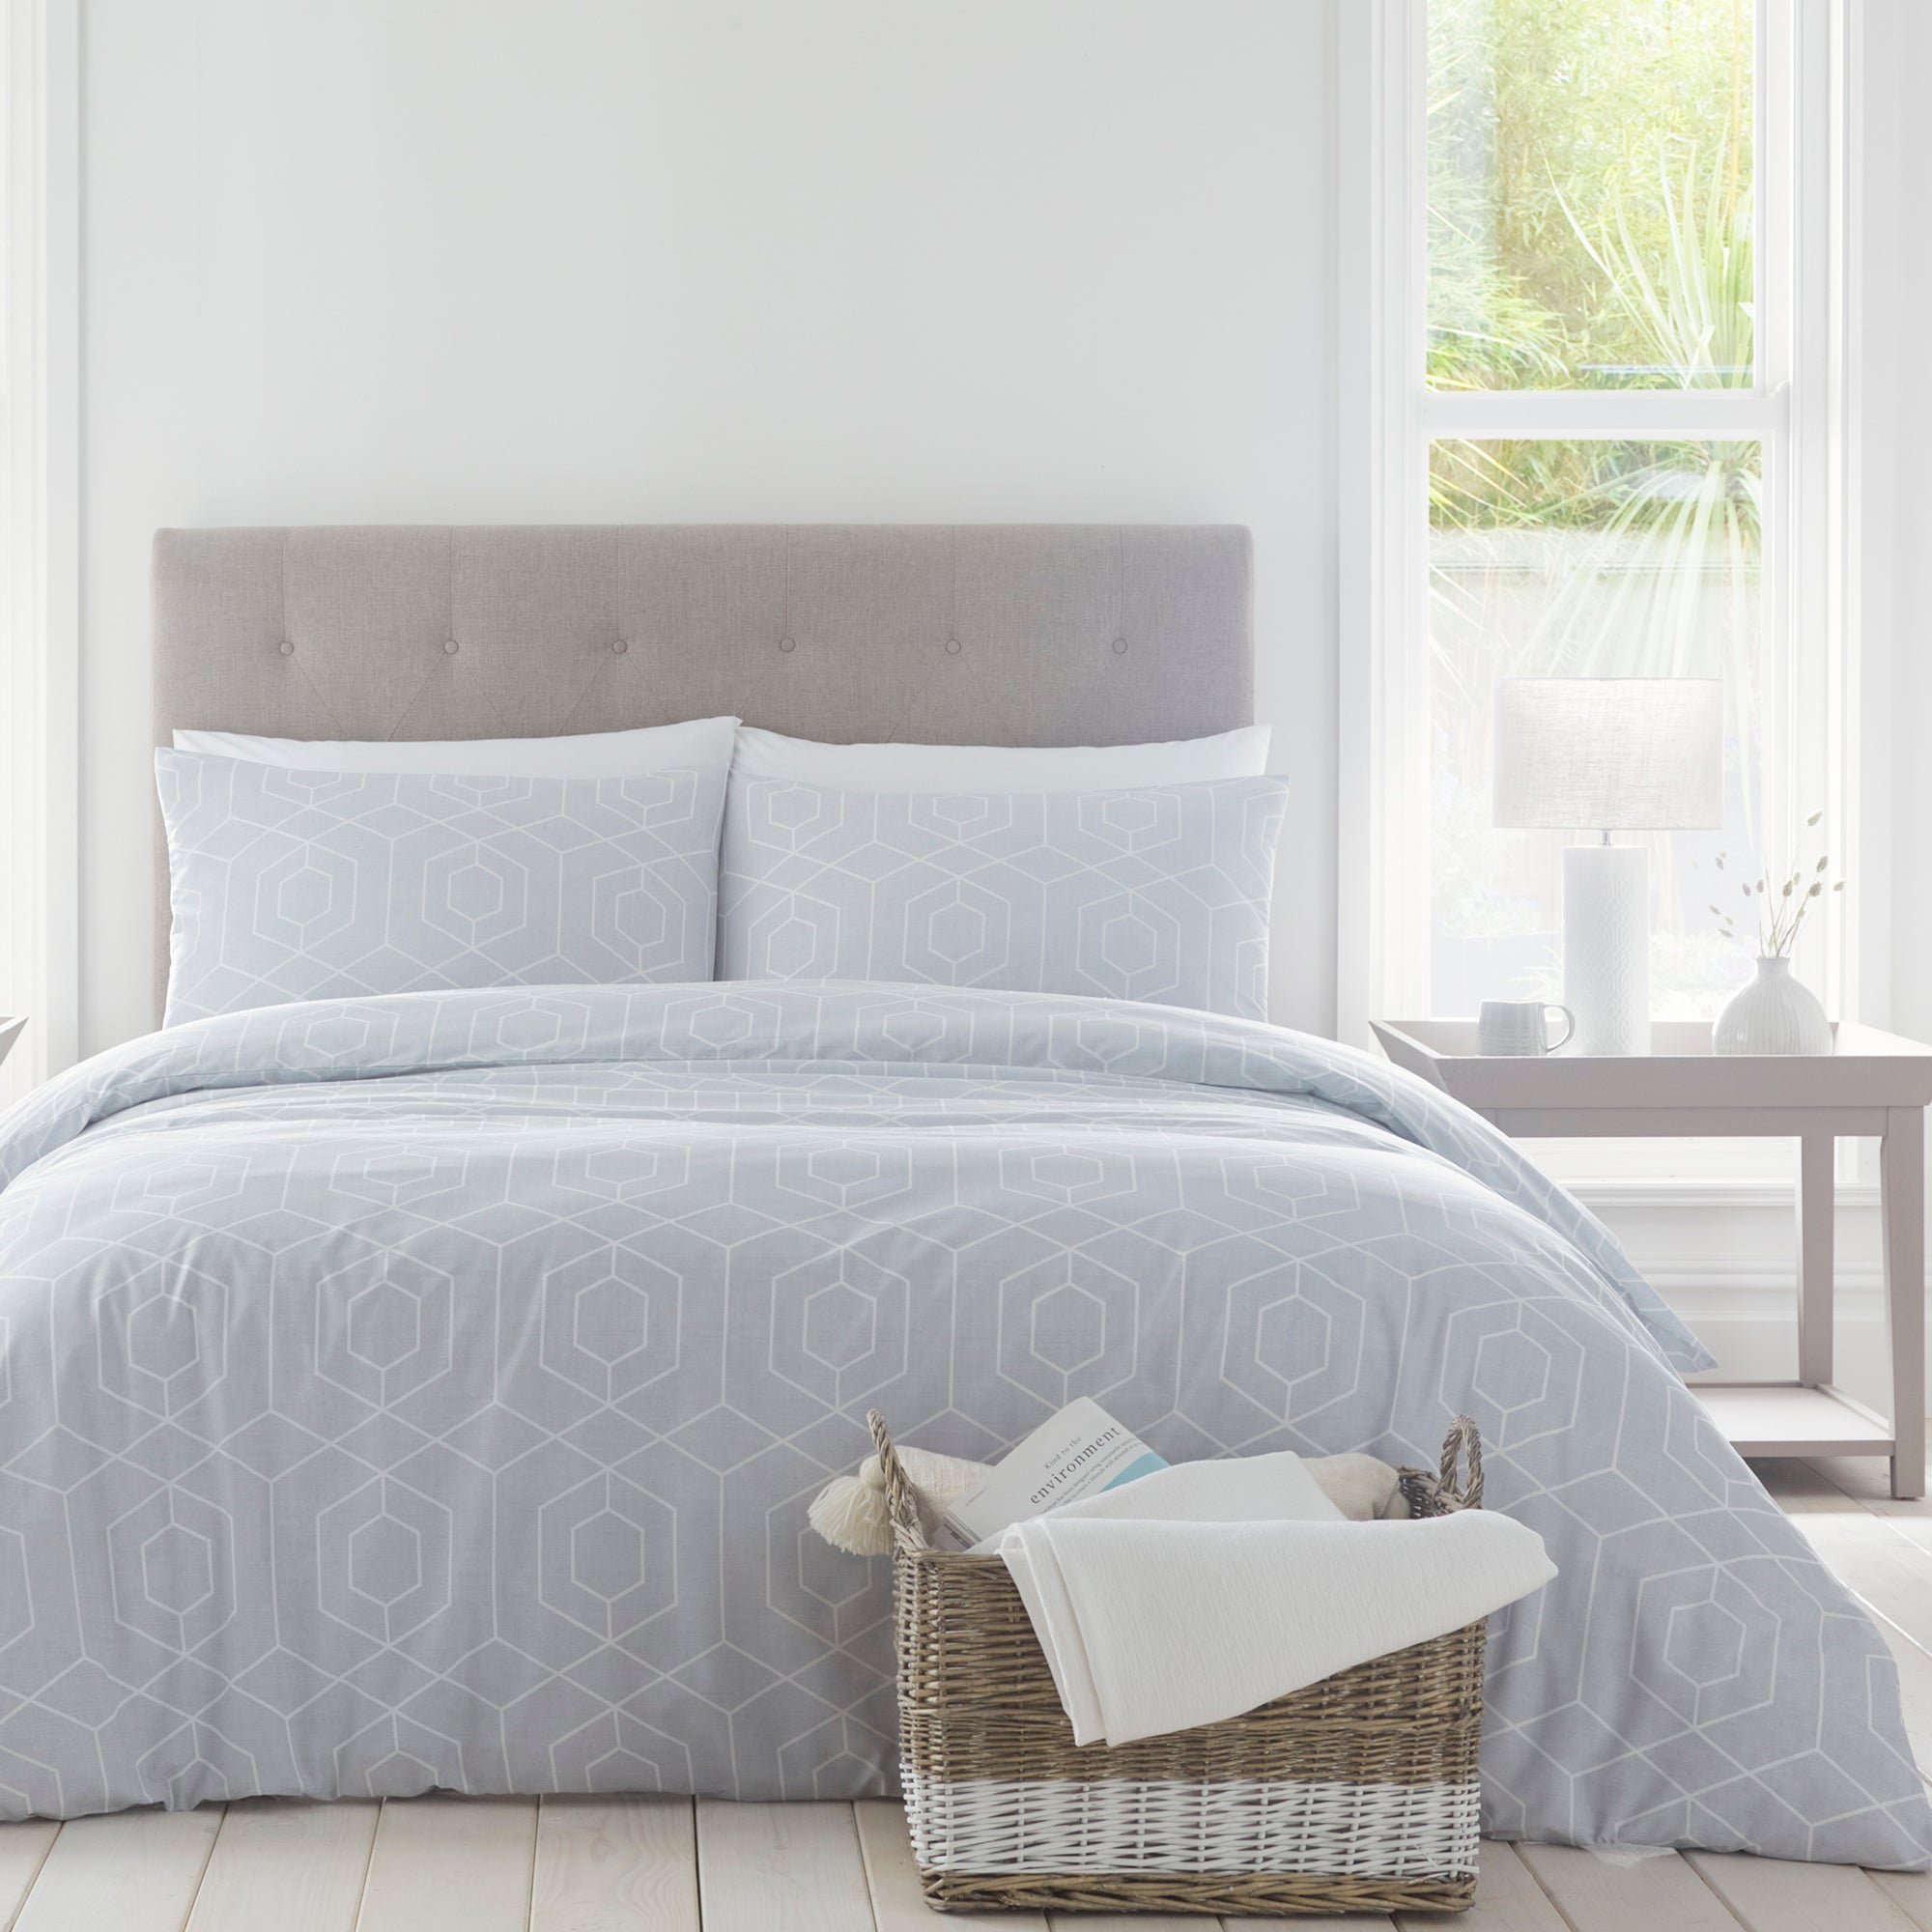 Greenwich - Eco-Friendly Duvet Cover Set in Silver by Drift Home